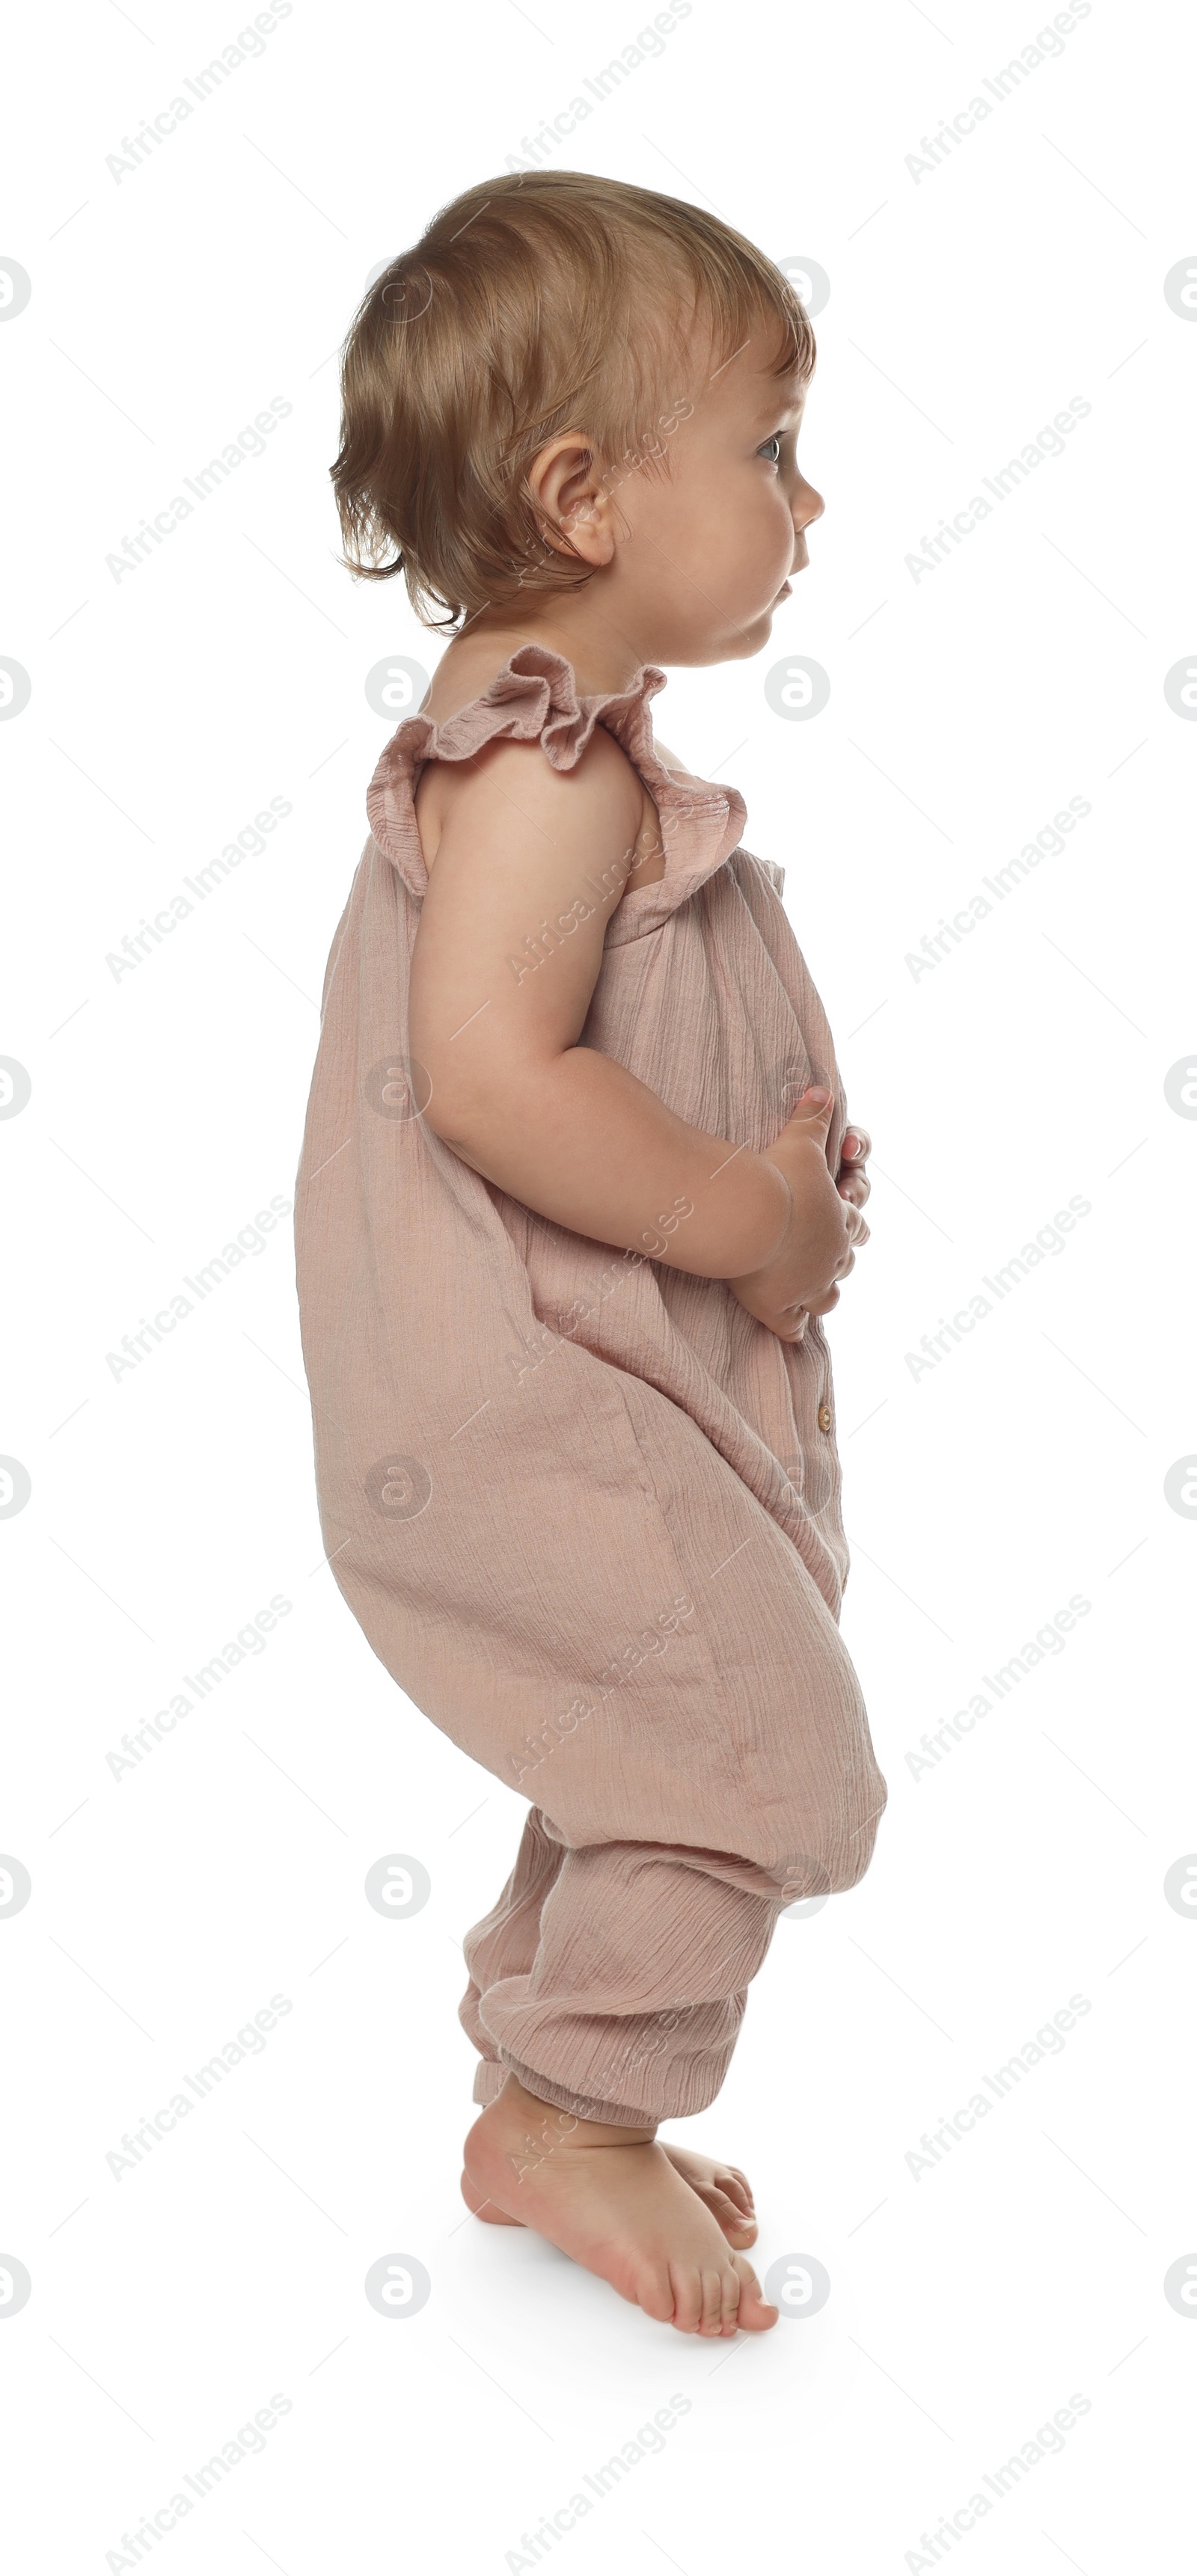 Photo of Cute baby girl learning to walk on white background